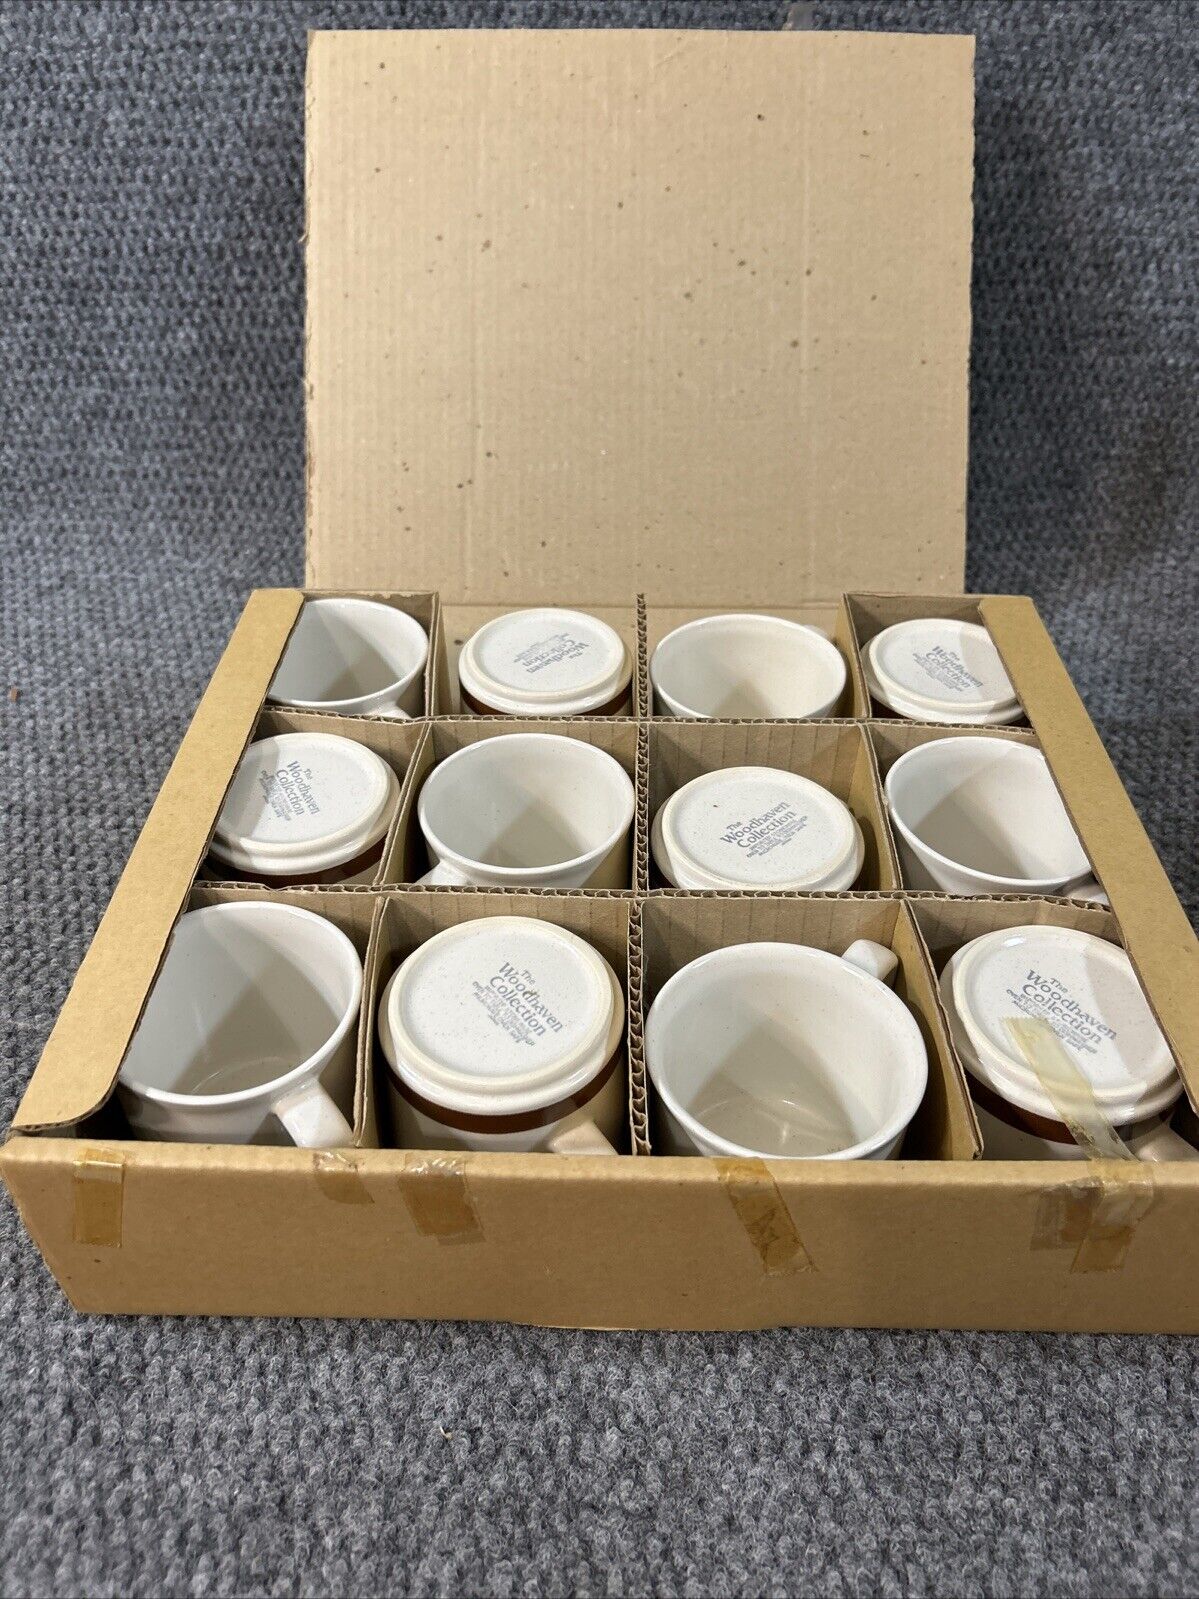 (12) Vintage The Woodhaven Collection Dinner Stoneware Coffee Cups Set MCM